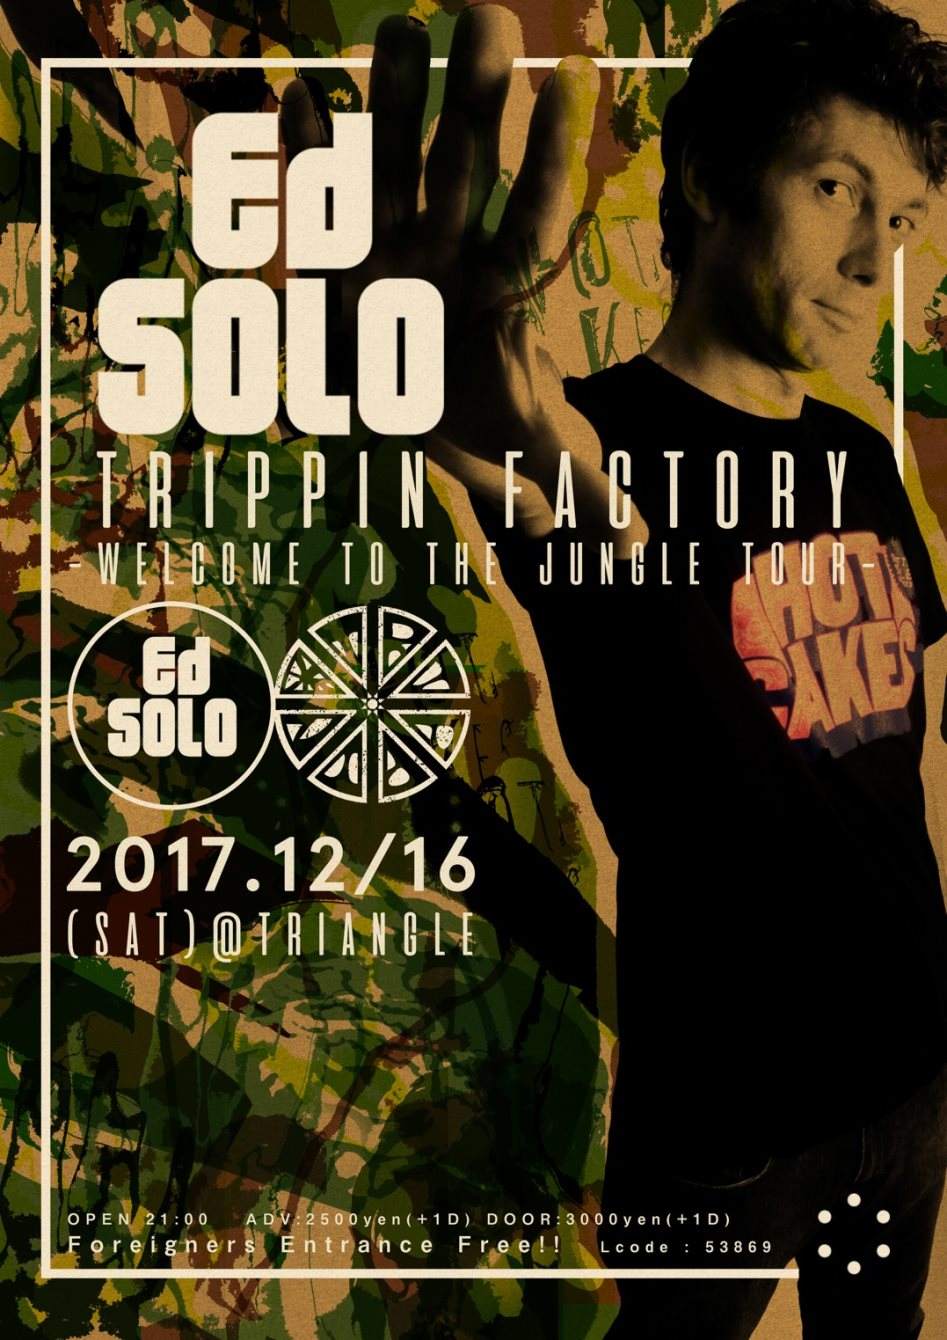 Trippin Factory-Welcome to The Jungle Tour- - フライヤー裏